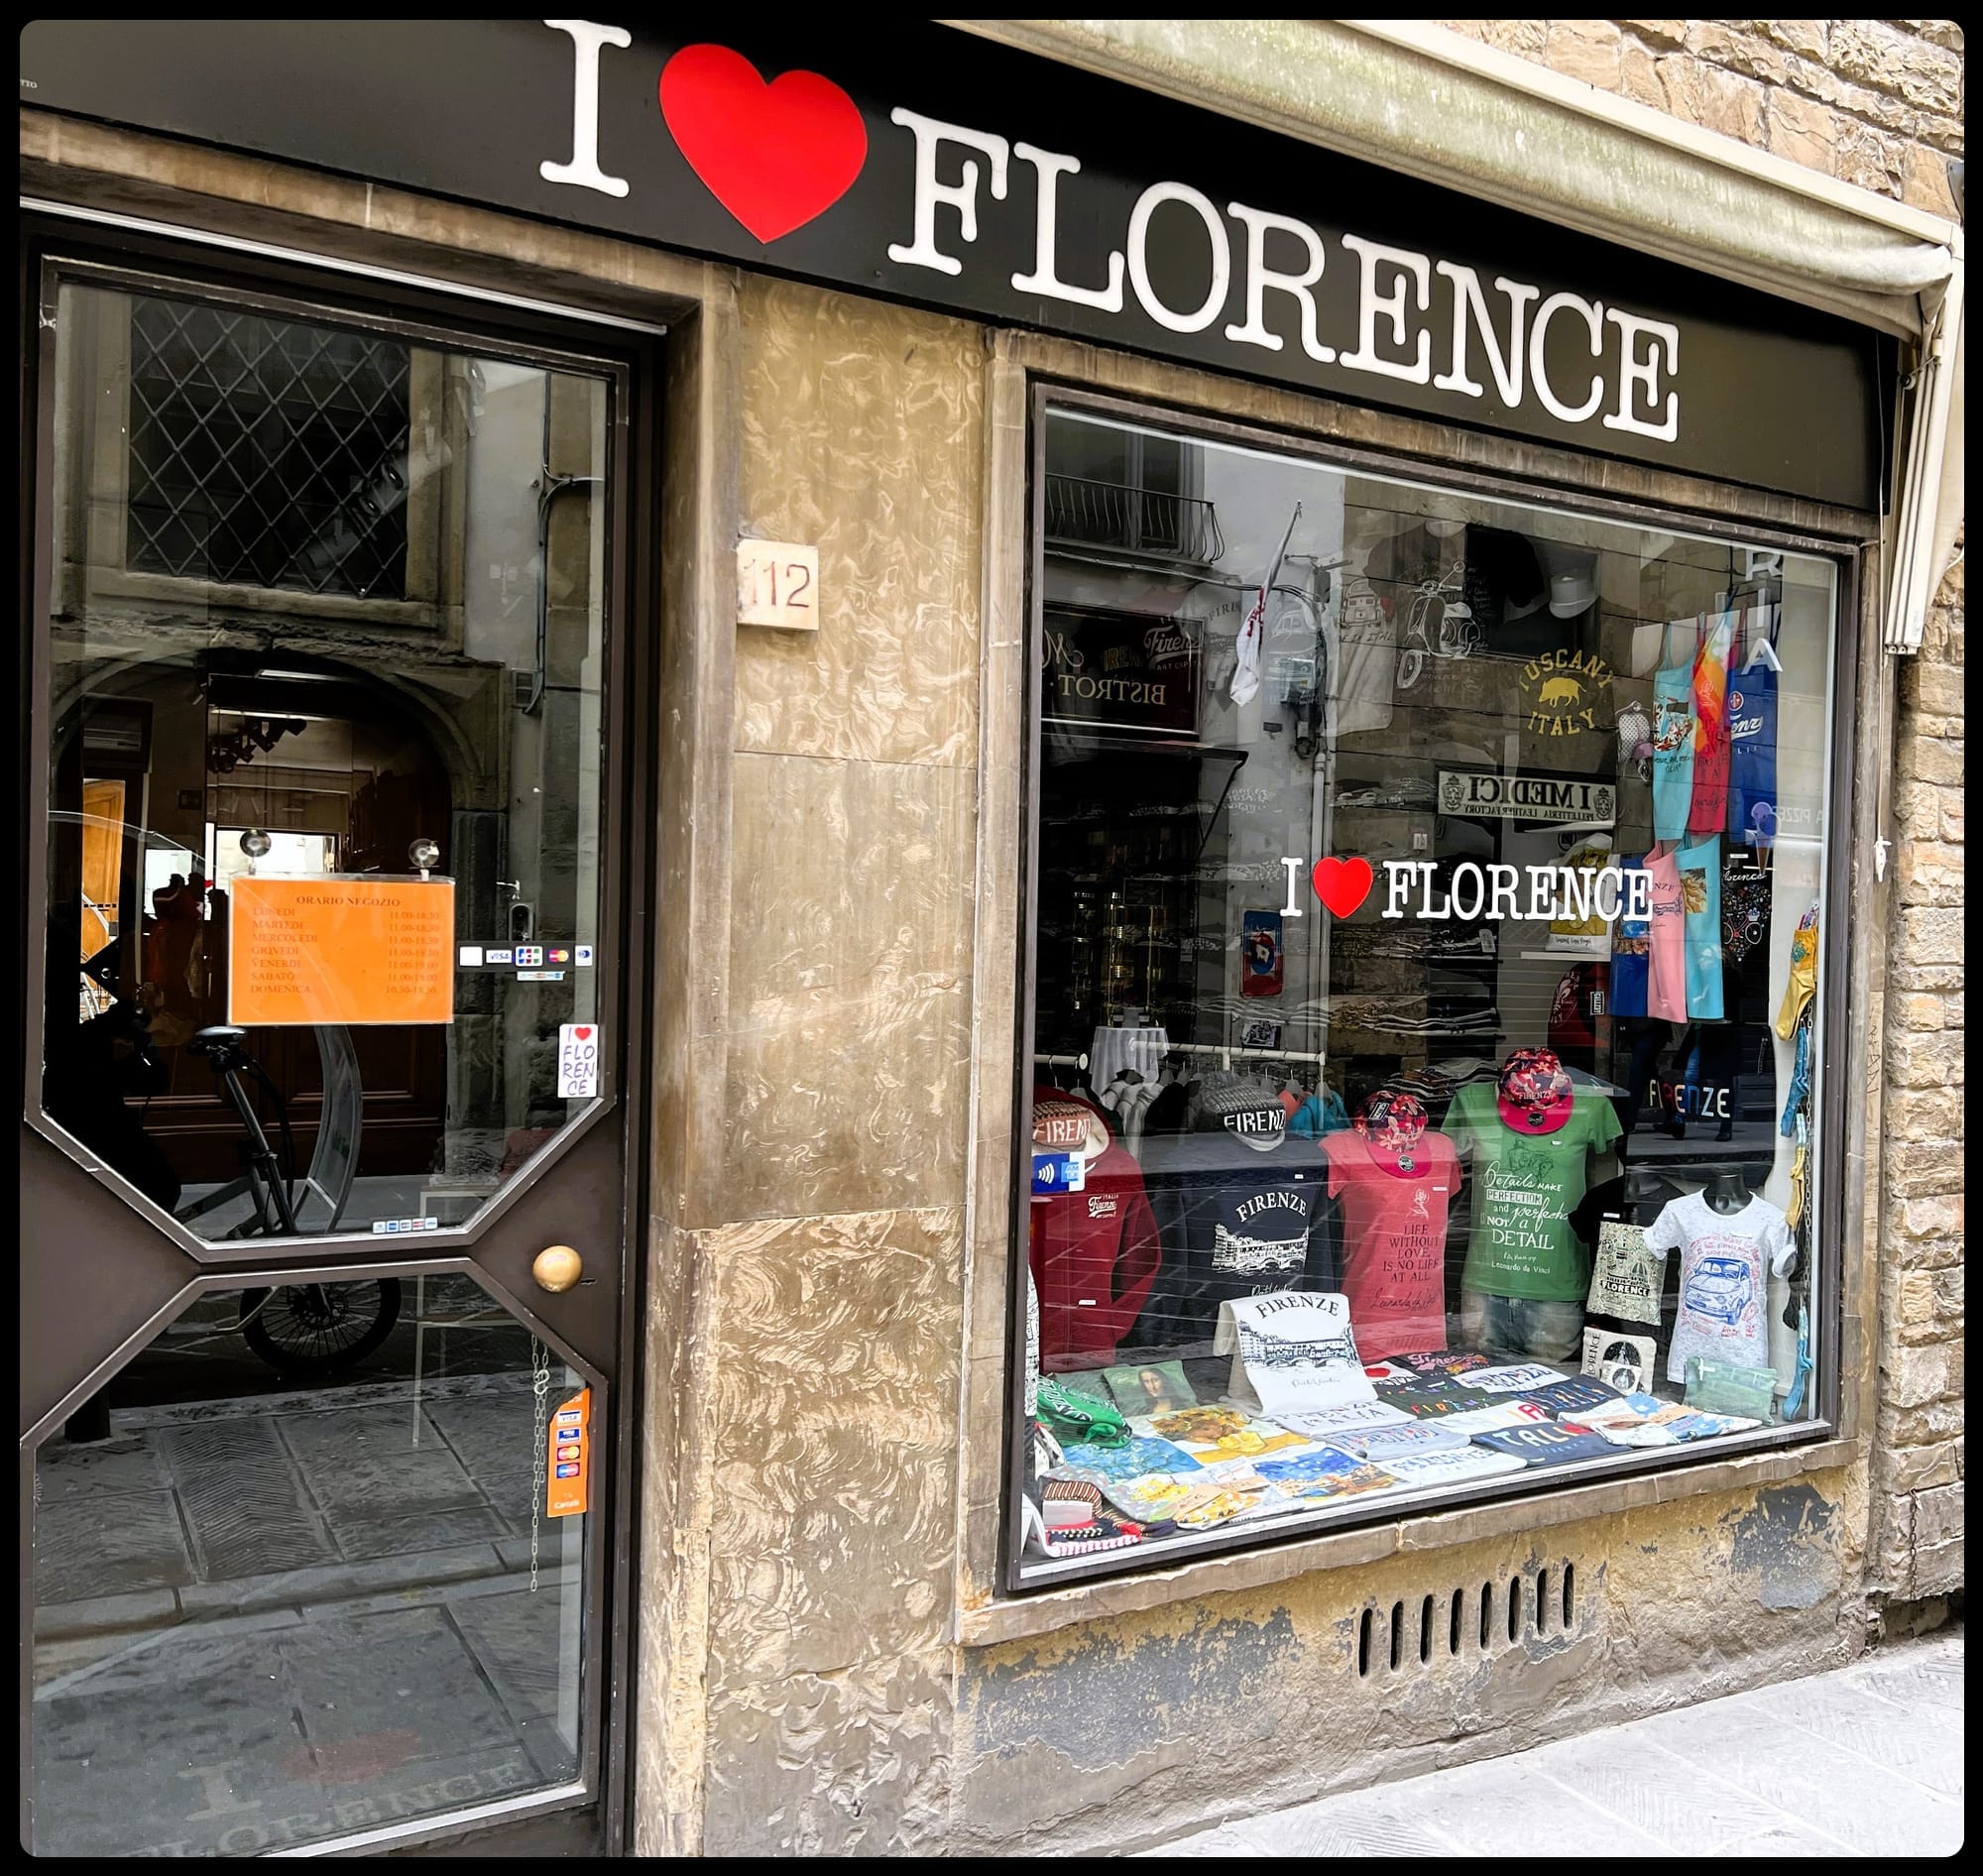 The front window of a souvenir shop called "I Love Florence" near the Ponte Vecchio in Florence.